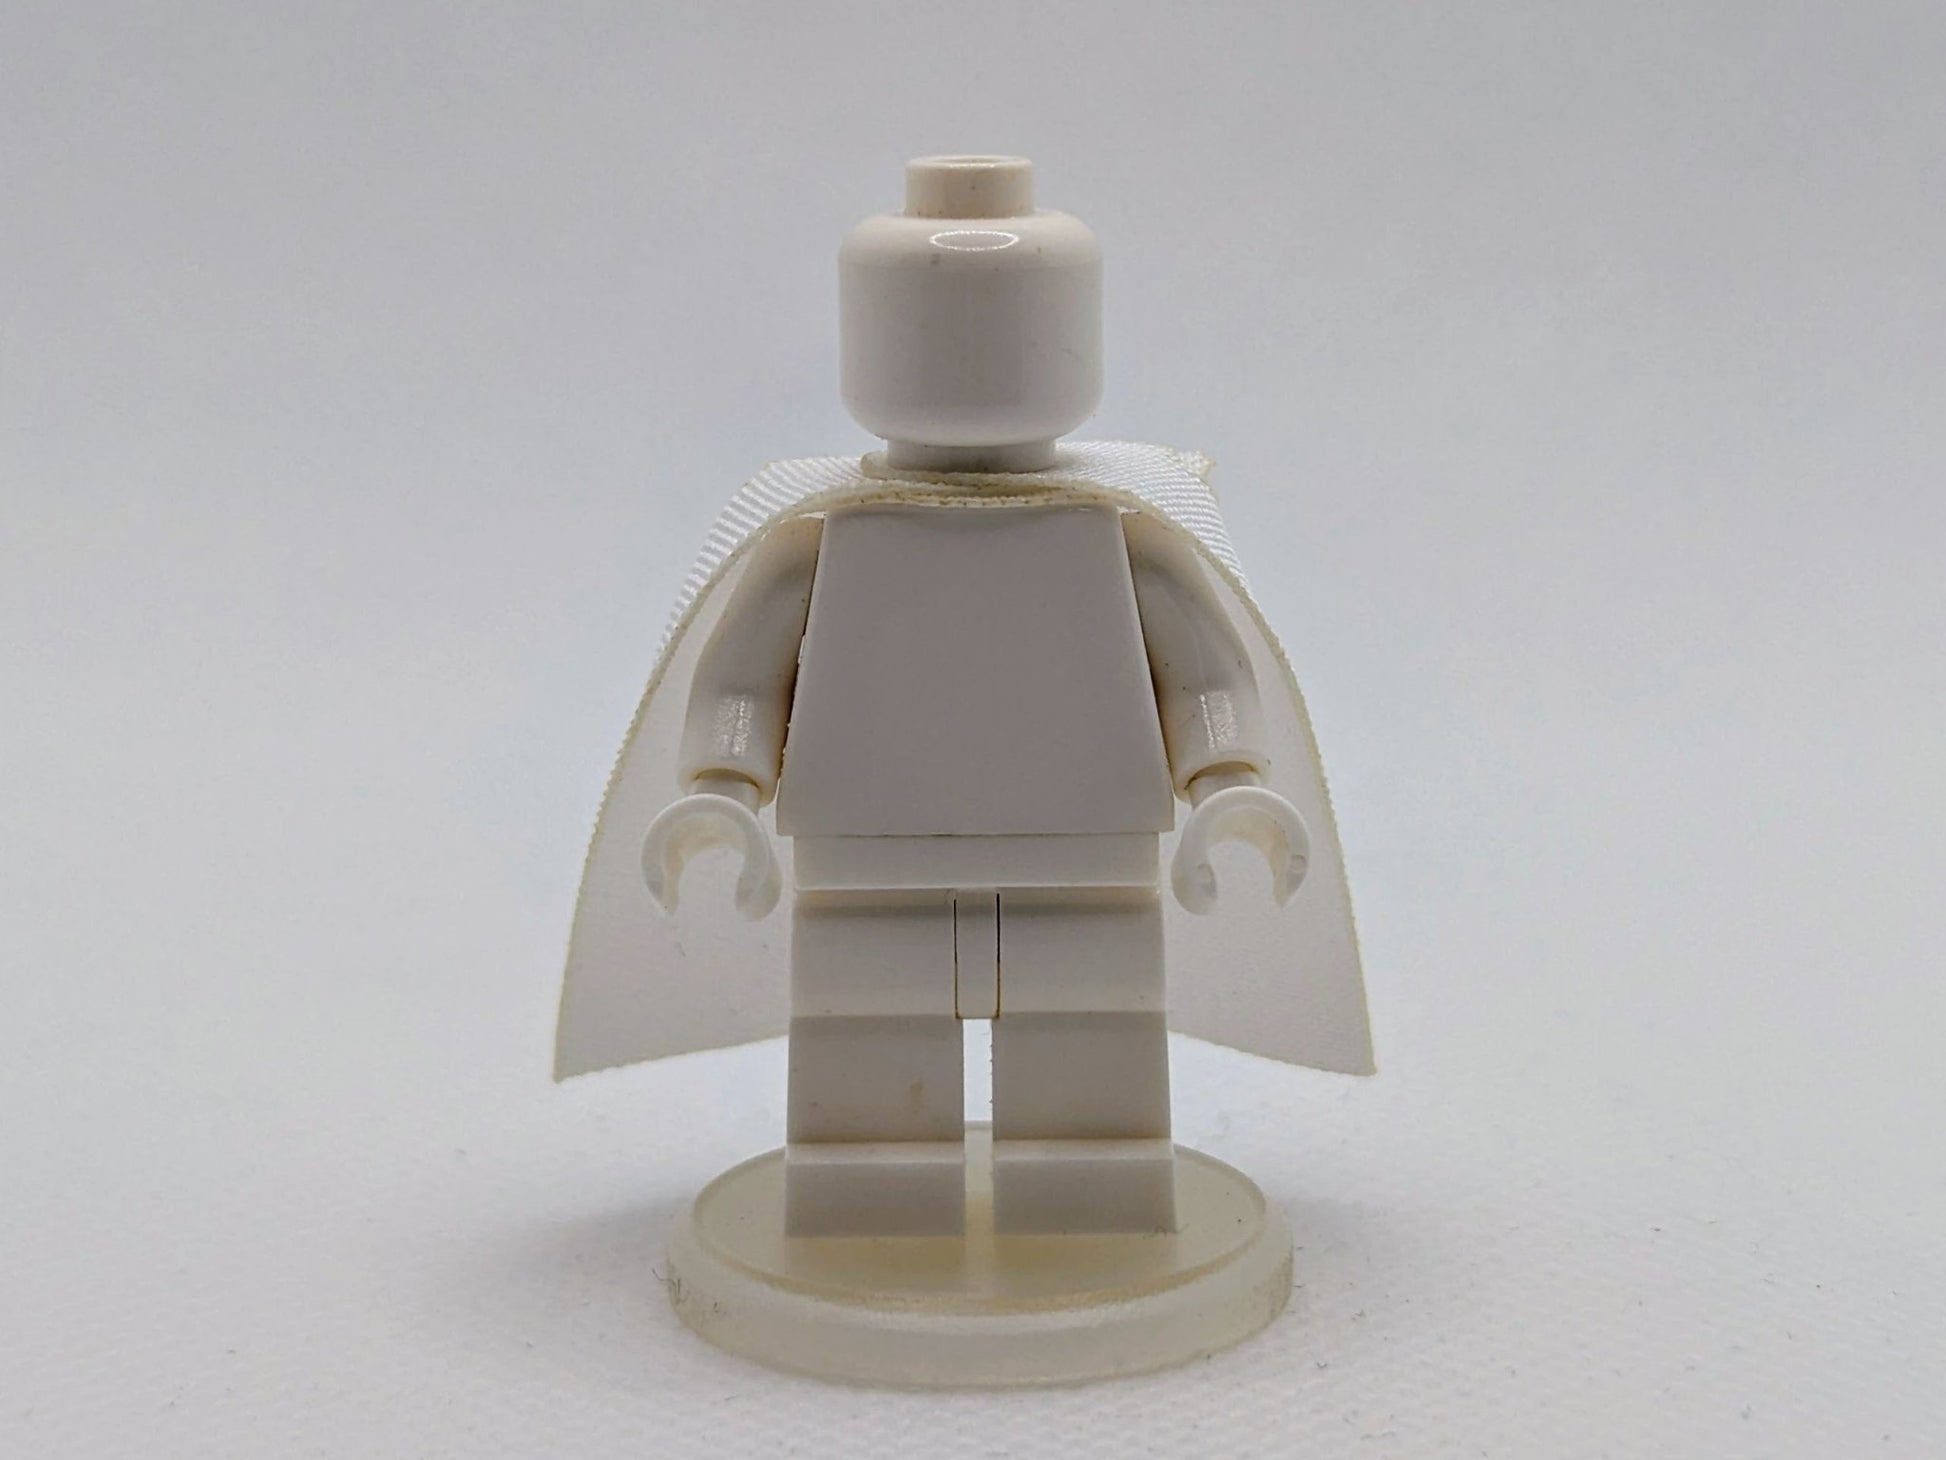 Over-Shoulder Cape by capes4minifigs - RPGminifigs